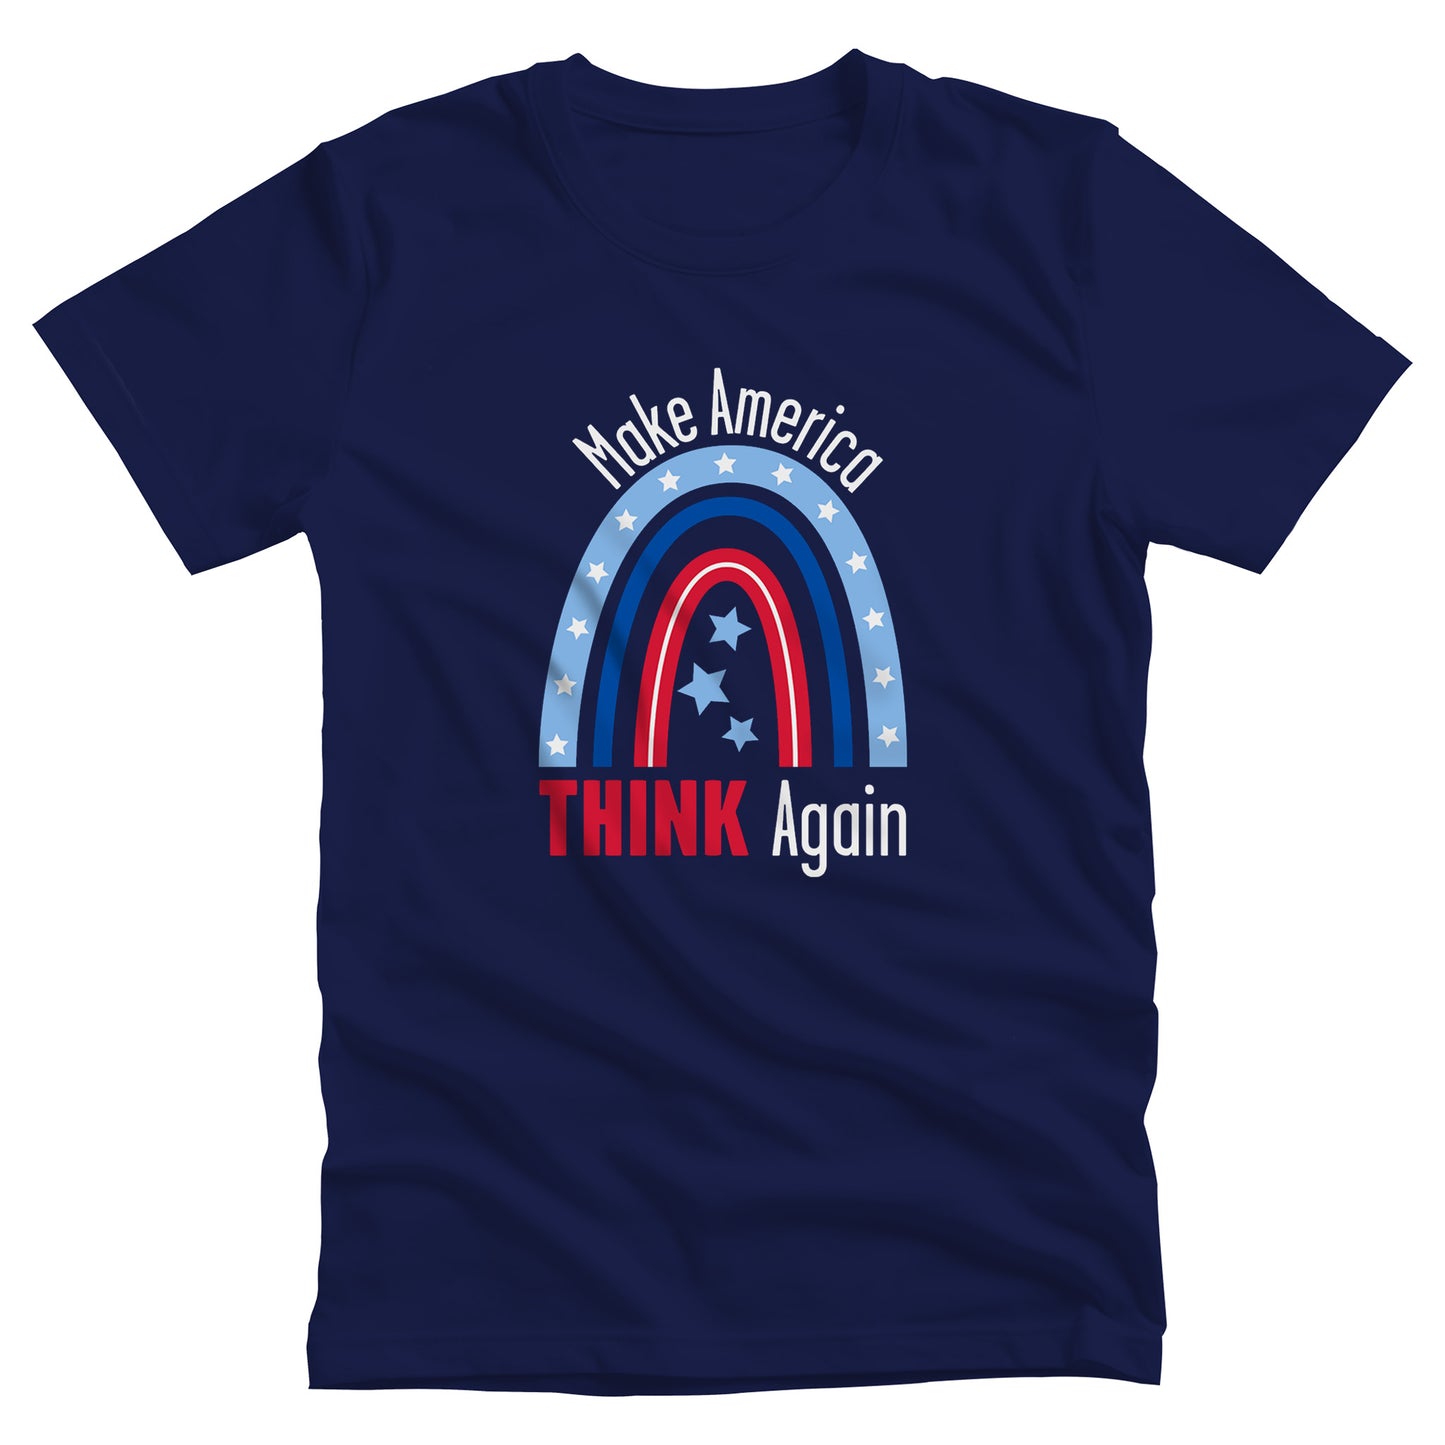 Navy Blue unisex t-shirt that says, “Make America THINK Again” with a graphic of a blue and red rainbow. “Make America” is red and arched over the rainbow. “THINK Again” is beneath the rainbow with “THINK” being blue and “Again” being red.